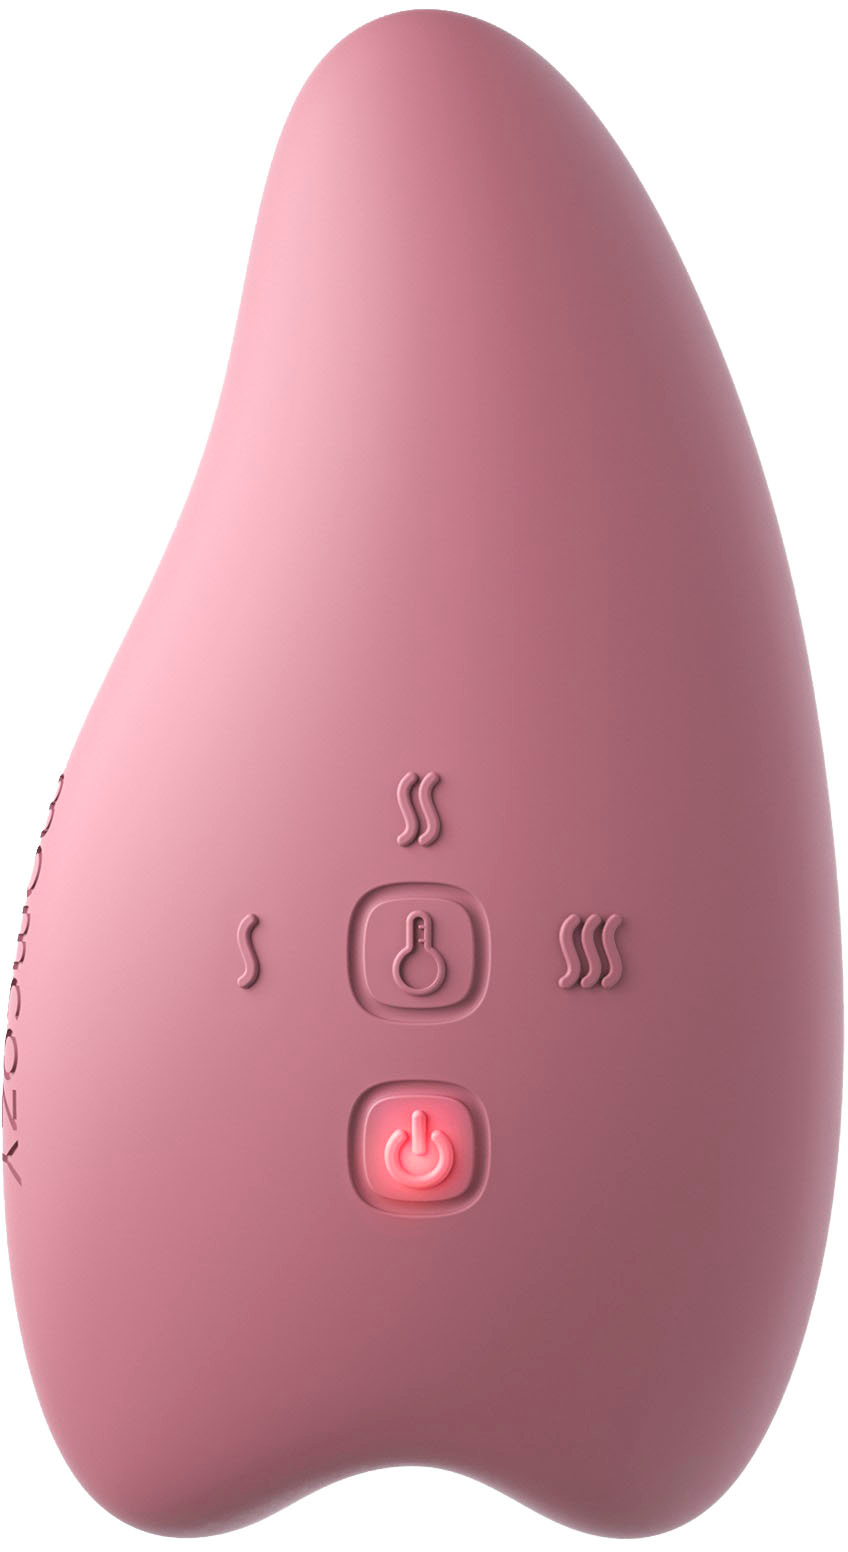 Lactation Massager With 3 Modes Of Heat And 10 Modes Of Vibration Warming Breast  Massager Breastfeeding For Clogged Duct Mastitis Engorgement Relief Improve  Milk Flow Pumping, Find Great Deals Now